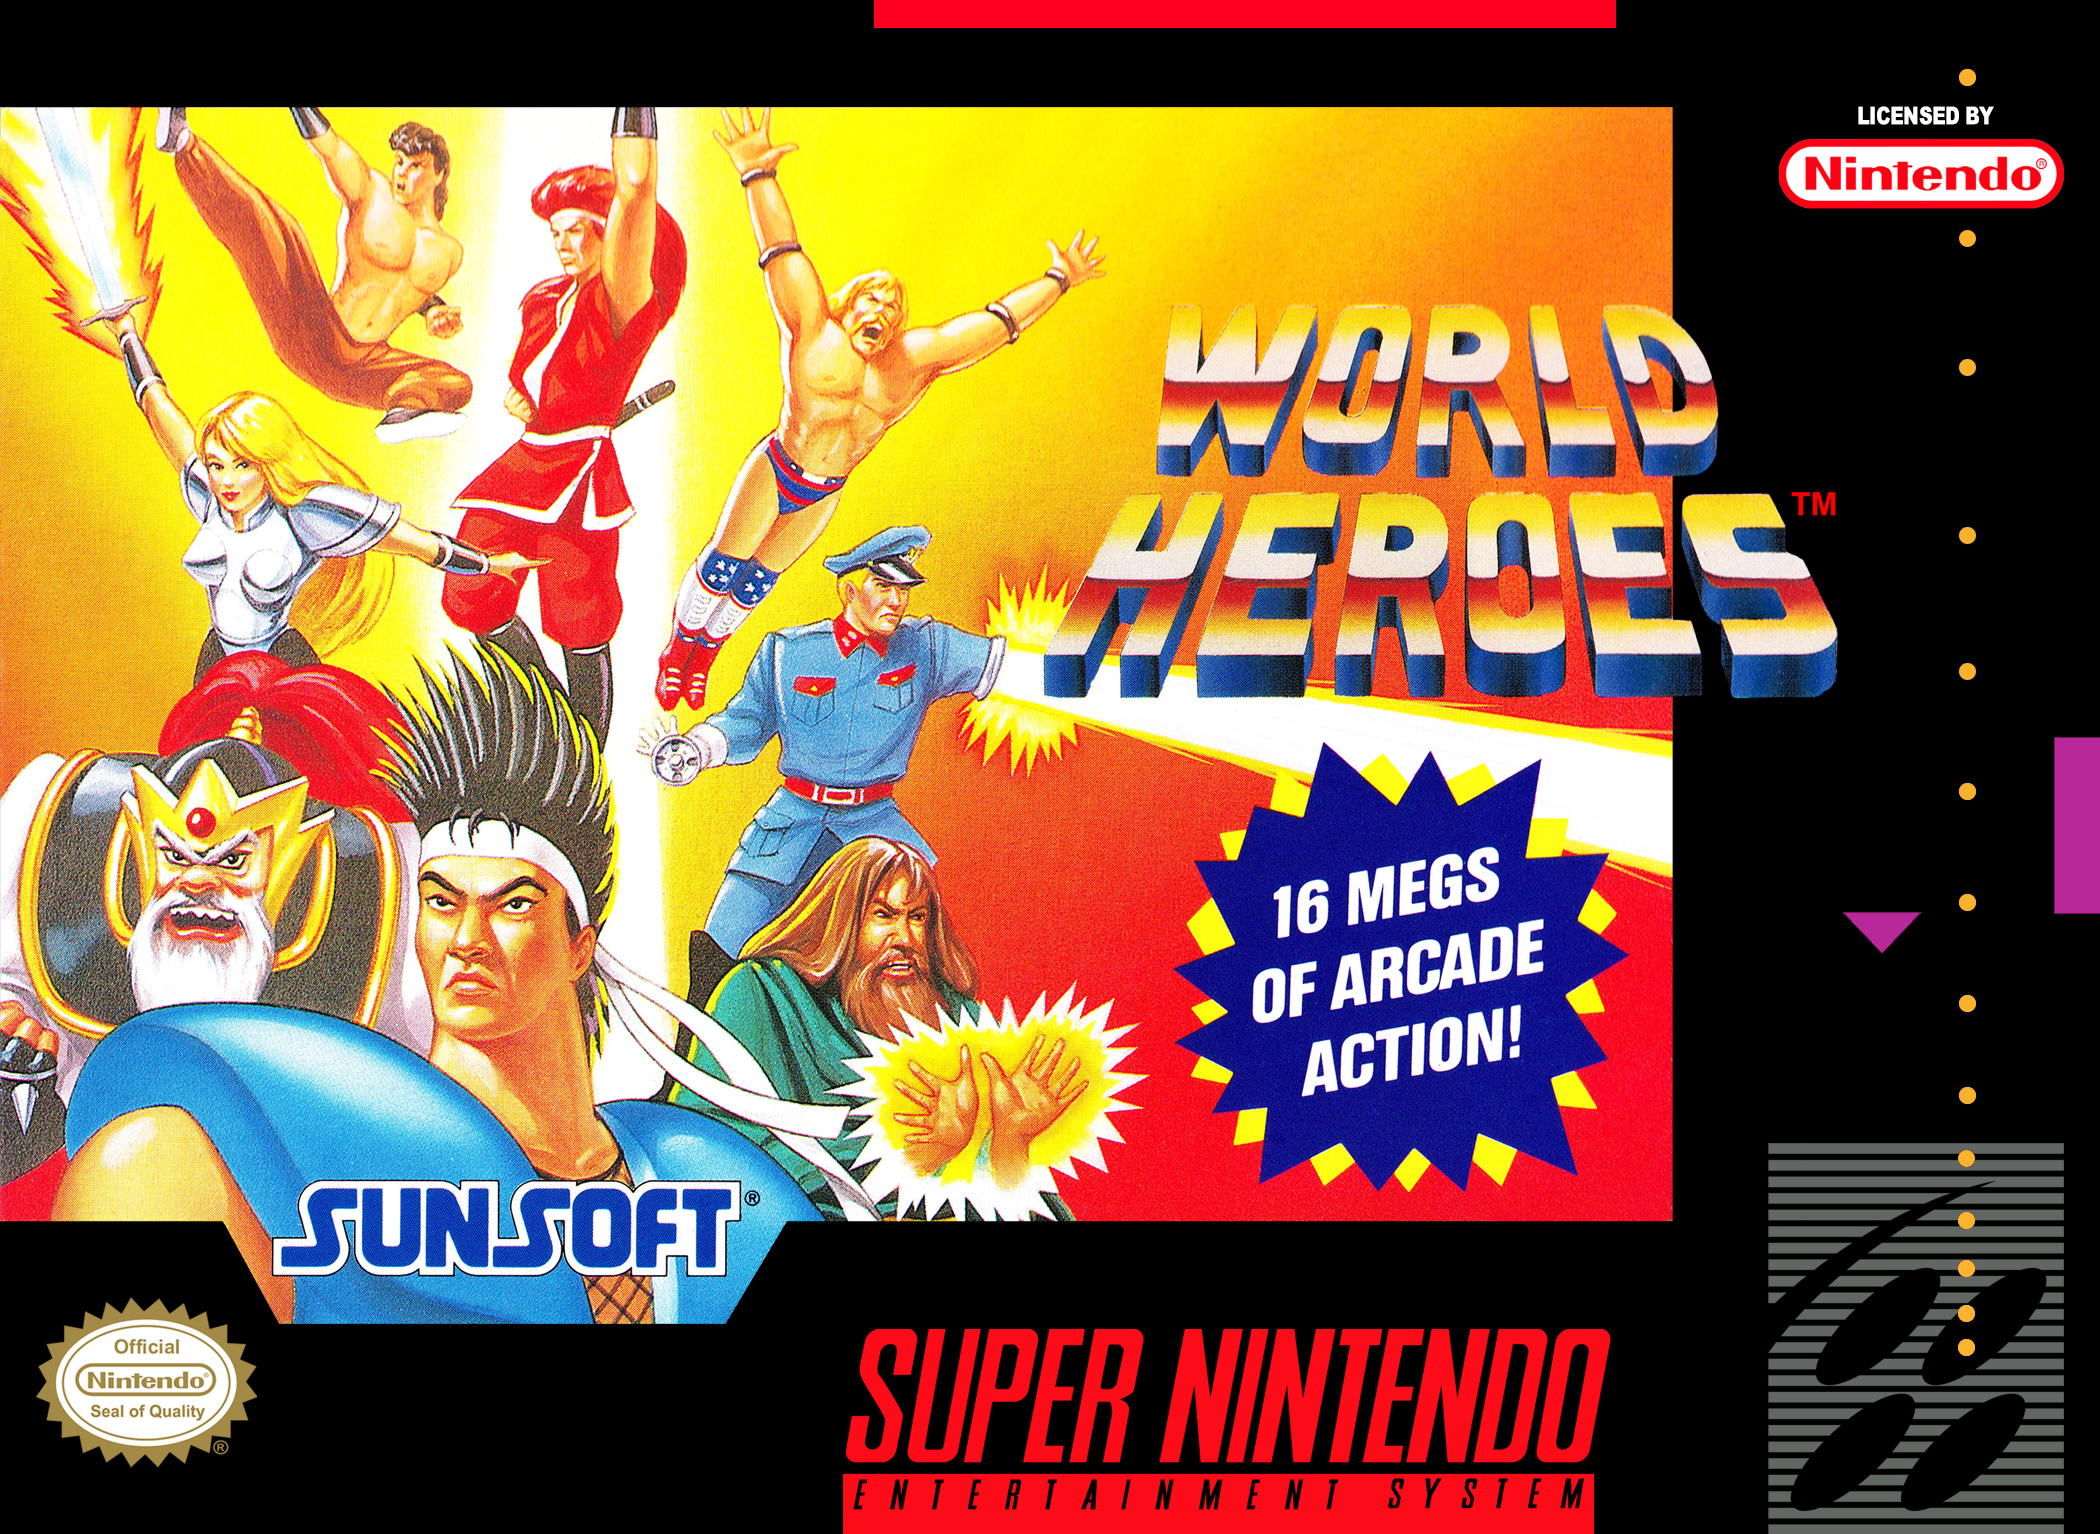 World Heroes Details Launchbox Games Database